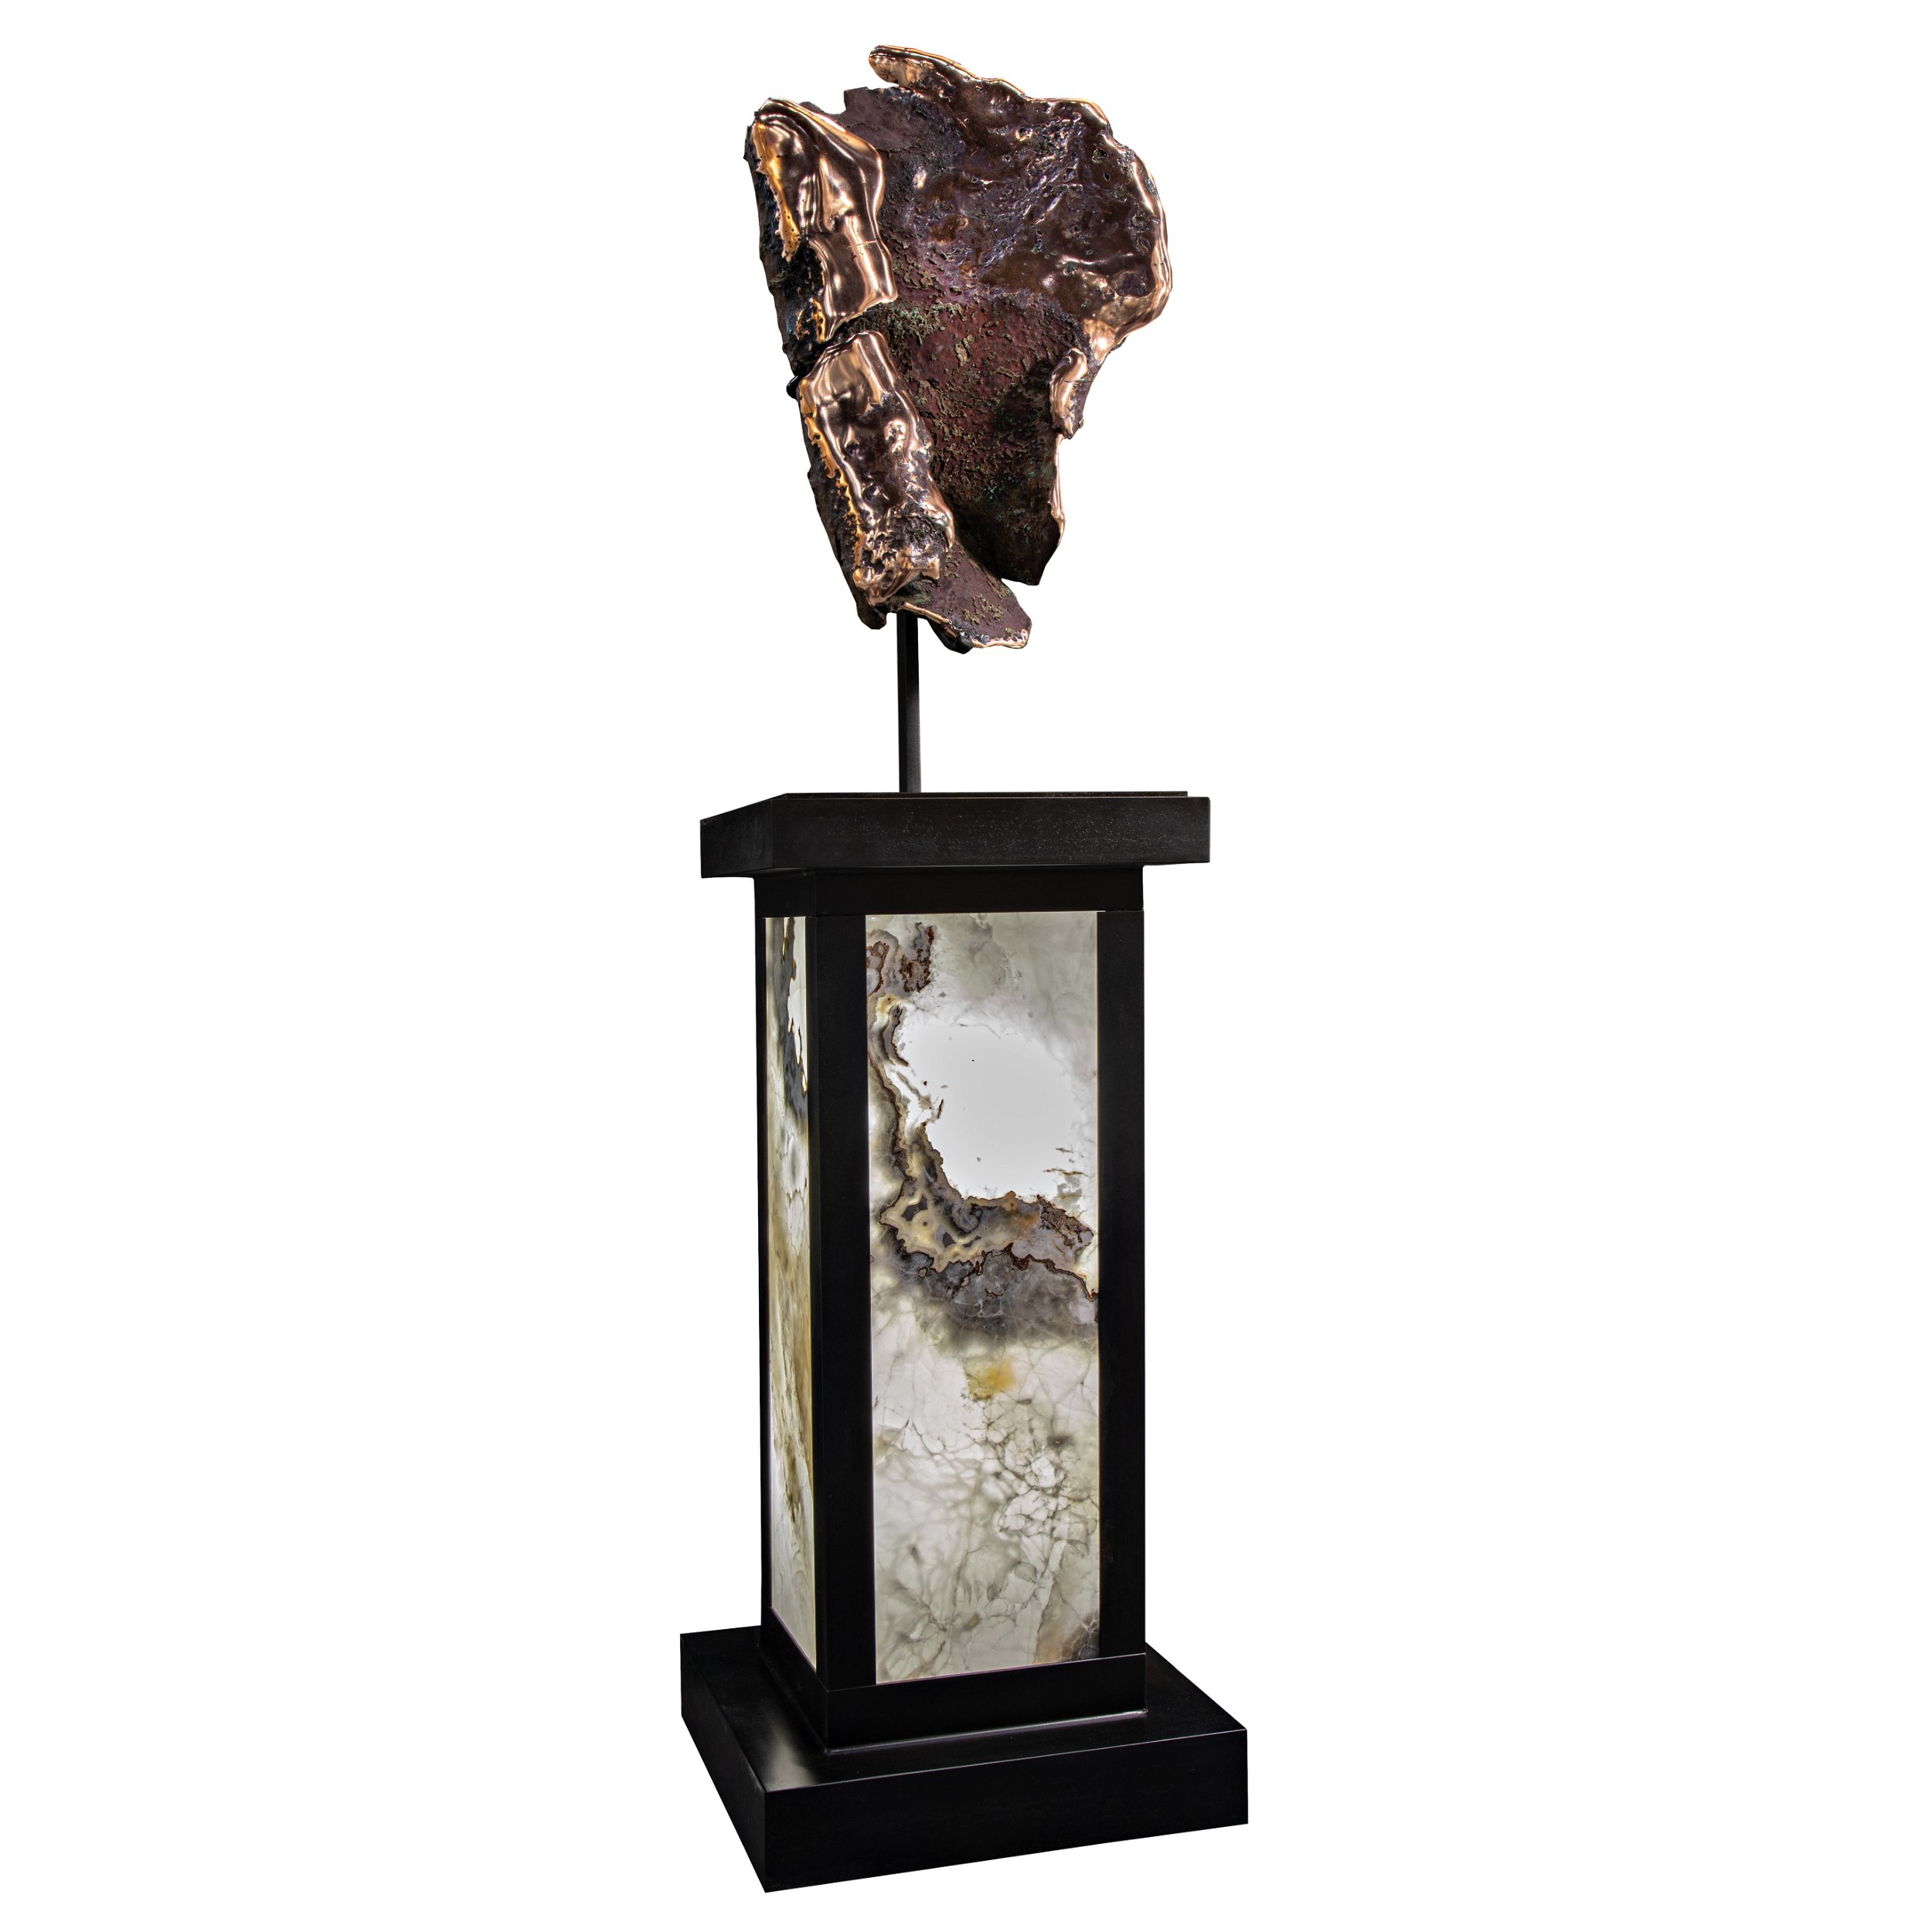 Michigan Copper Float Specimen on Custom Metal Floor Stand with Illuminated Pearlescent Side Walls with Rare Glacial Fold & Red Cuperite Inclusions